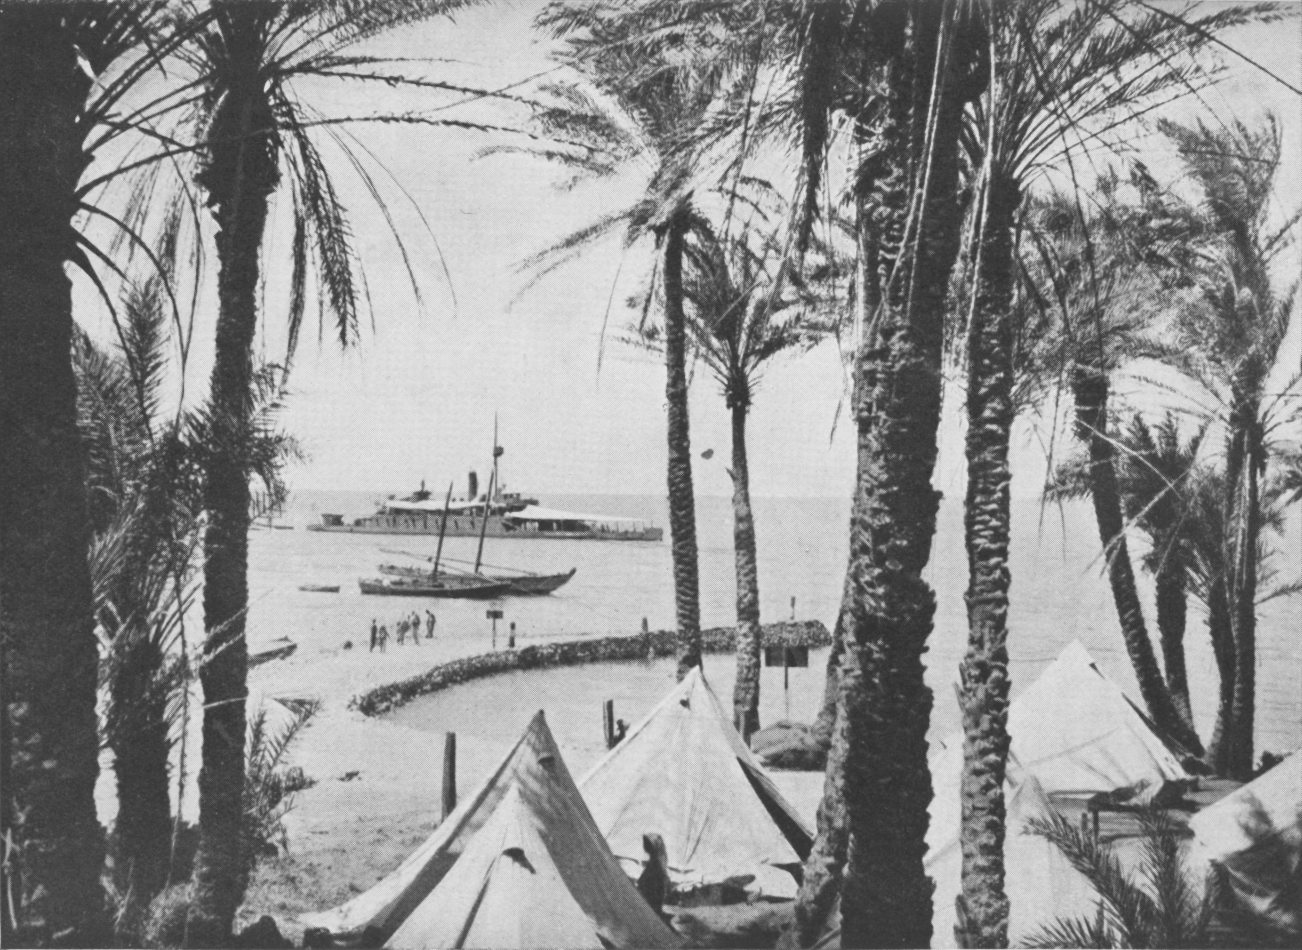 Photo wide shot of moored ships and boats framed by trees; people and tents are in foreground